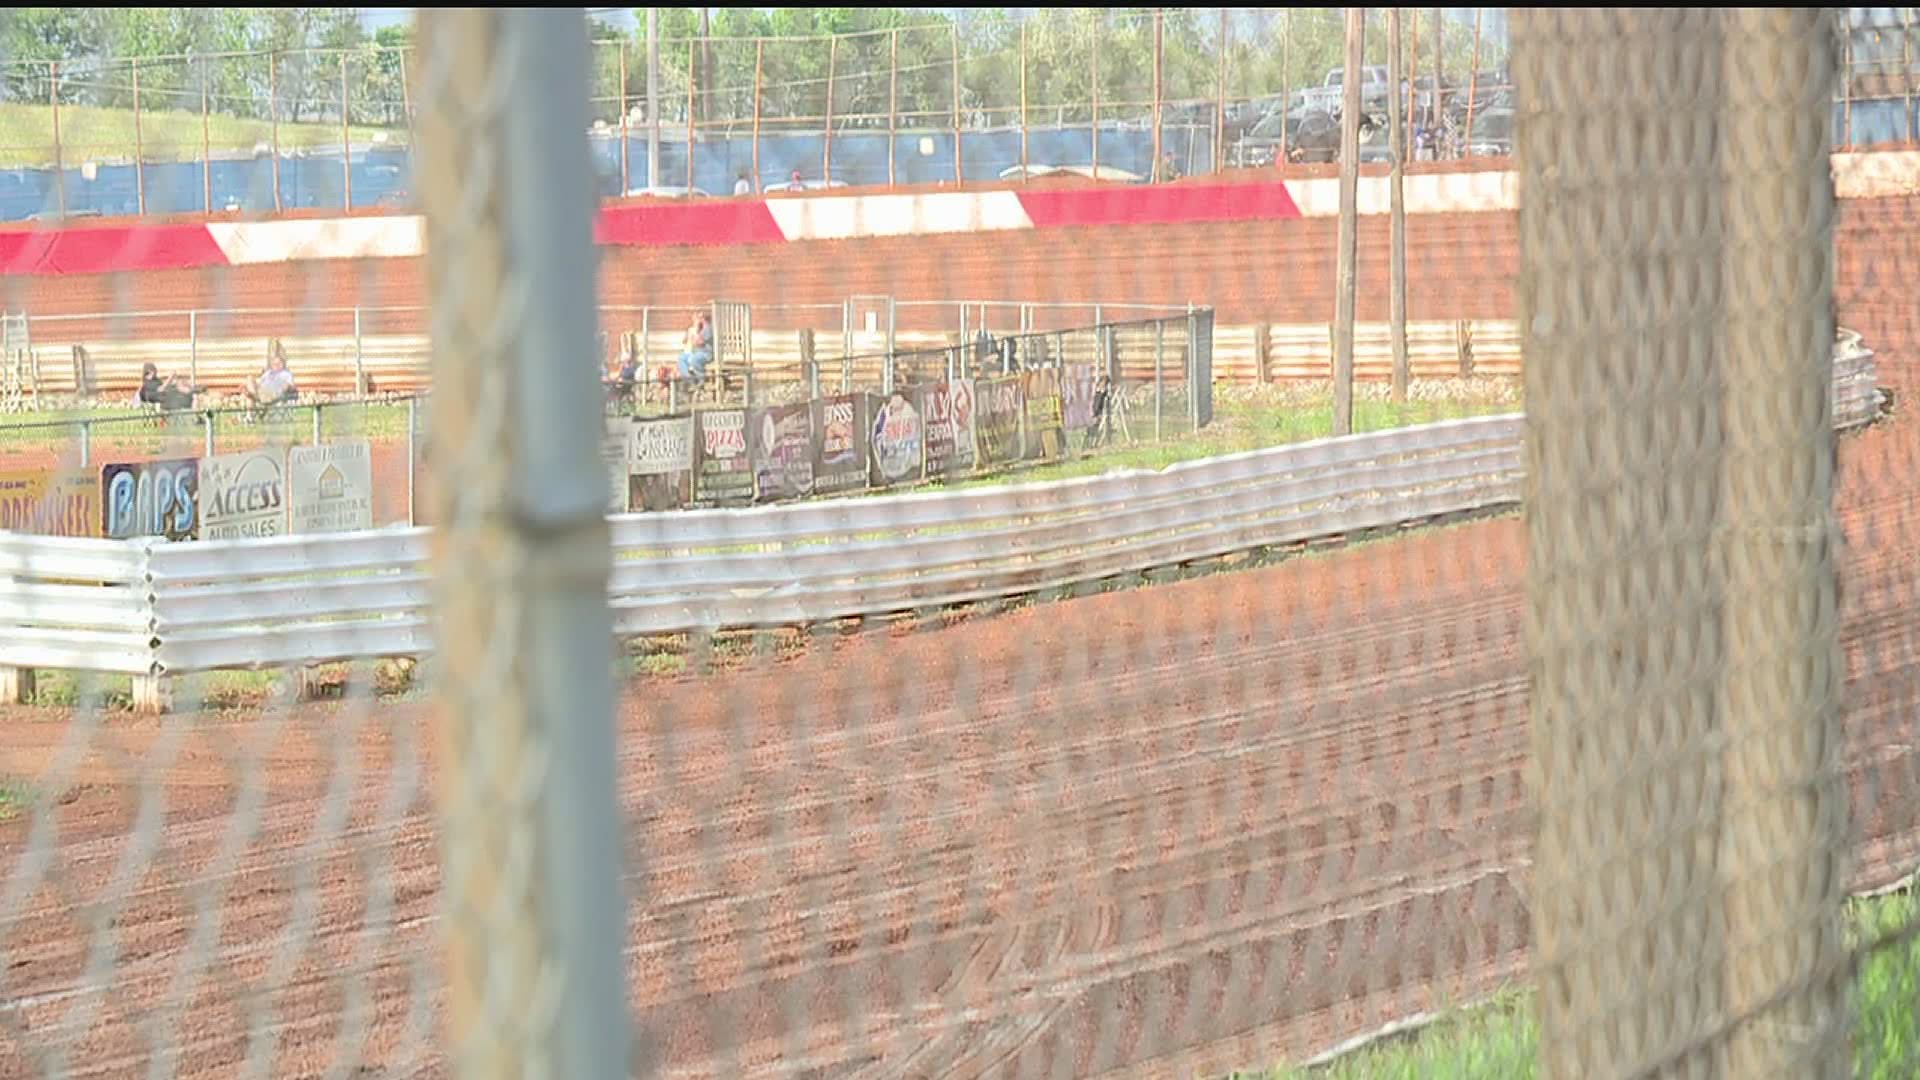 An Adams County race track hosted sprint car racing on Memorial Day, despite being in a yellow phase county.